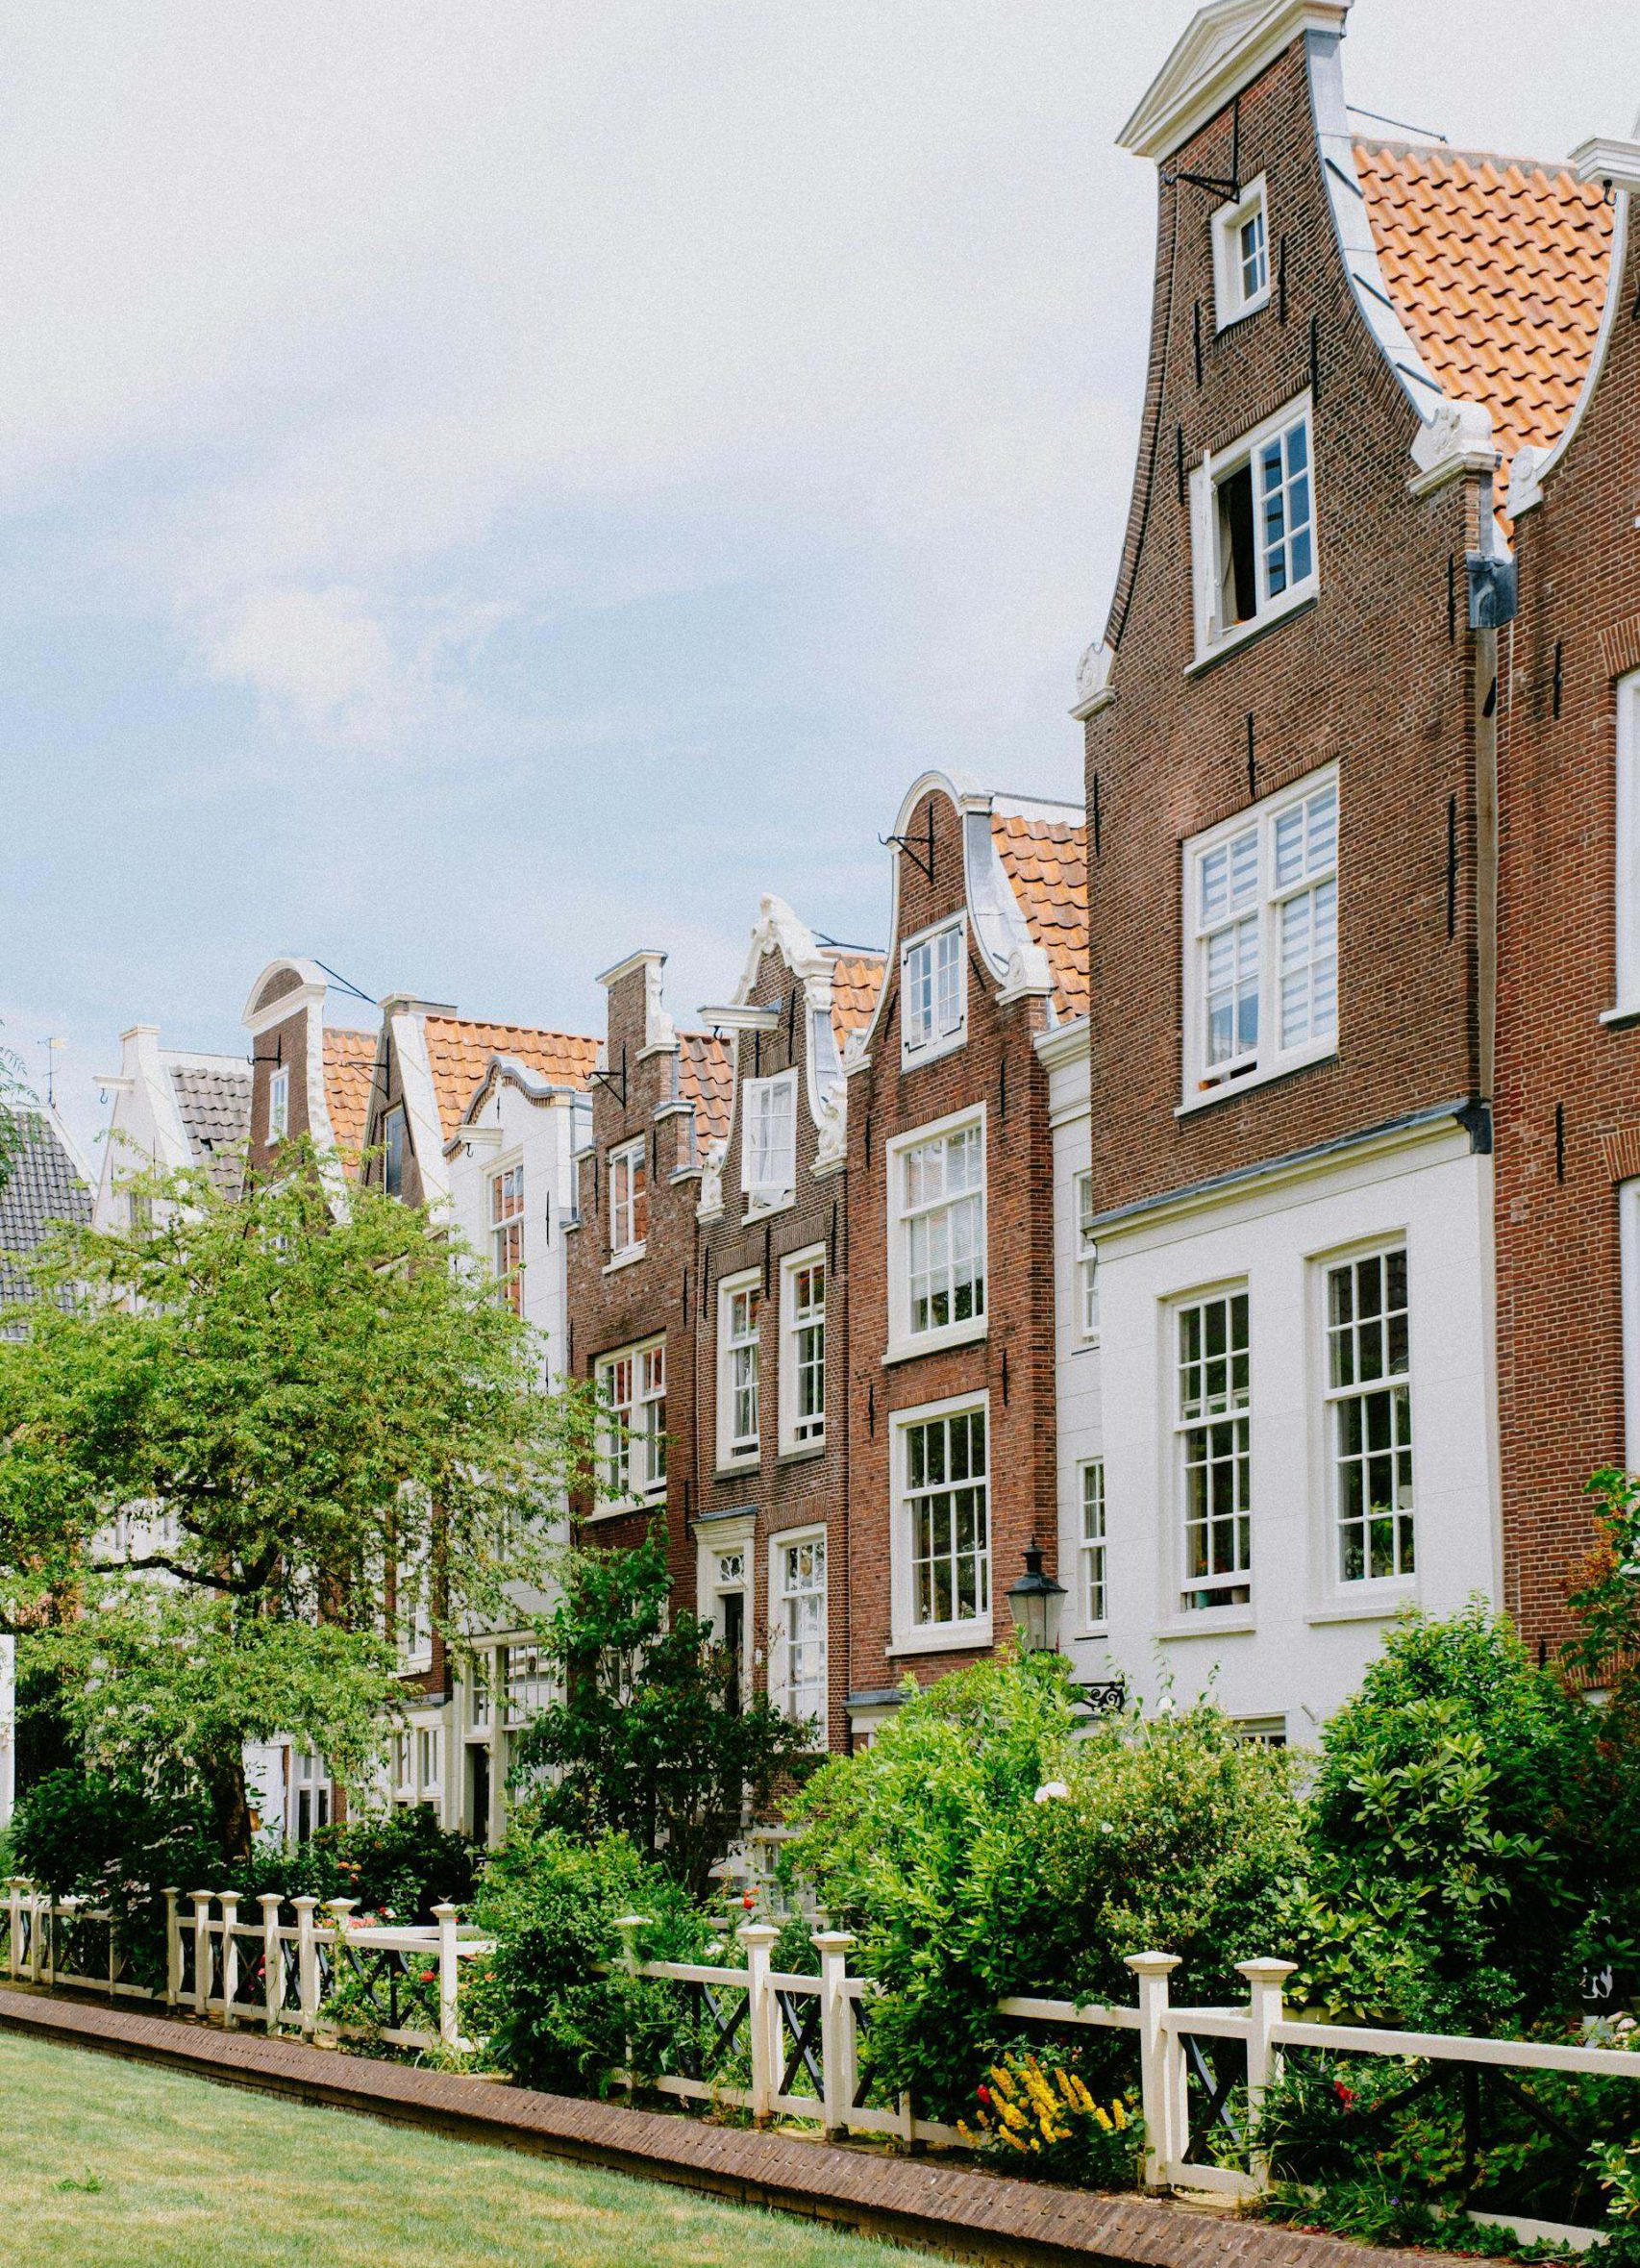 The serene Begijnhof courtyard in Amsterdam, featuring well-preserved medieval houses and lush gardens.